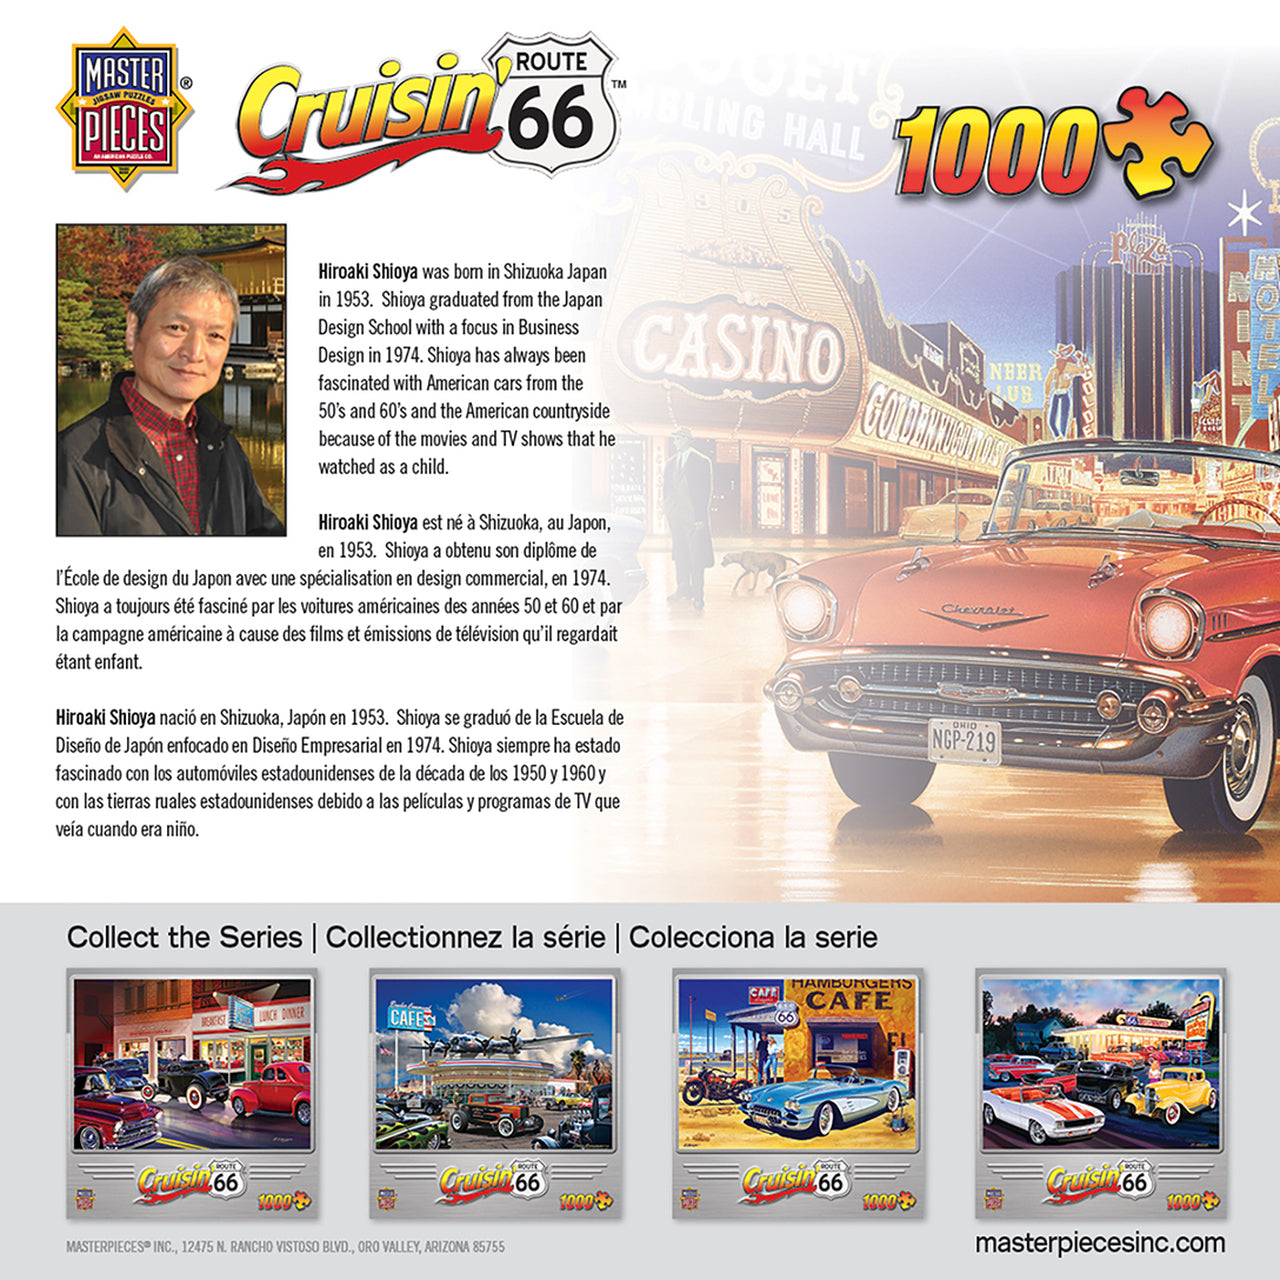 Cruisin' Route 66 - Gamblin' Man 1000 Piece Jigsaw Puzzle by Masterpieces